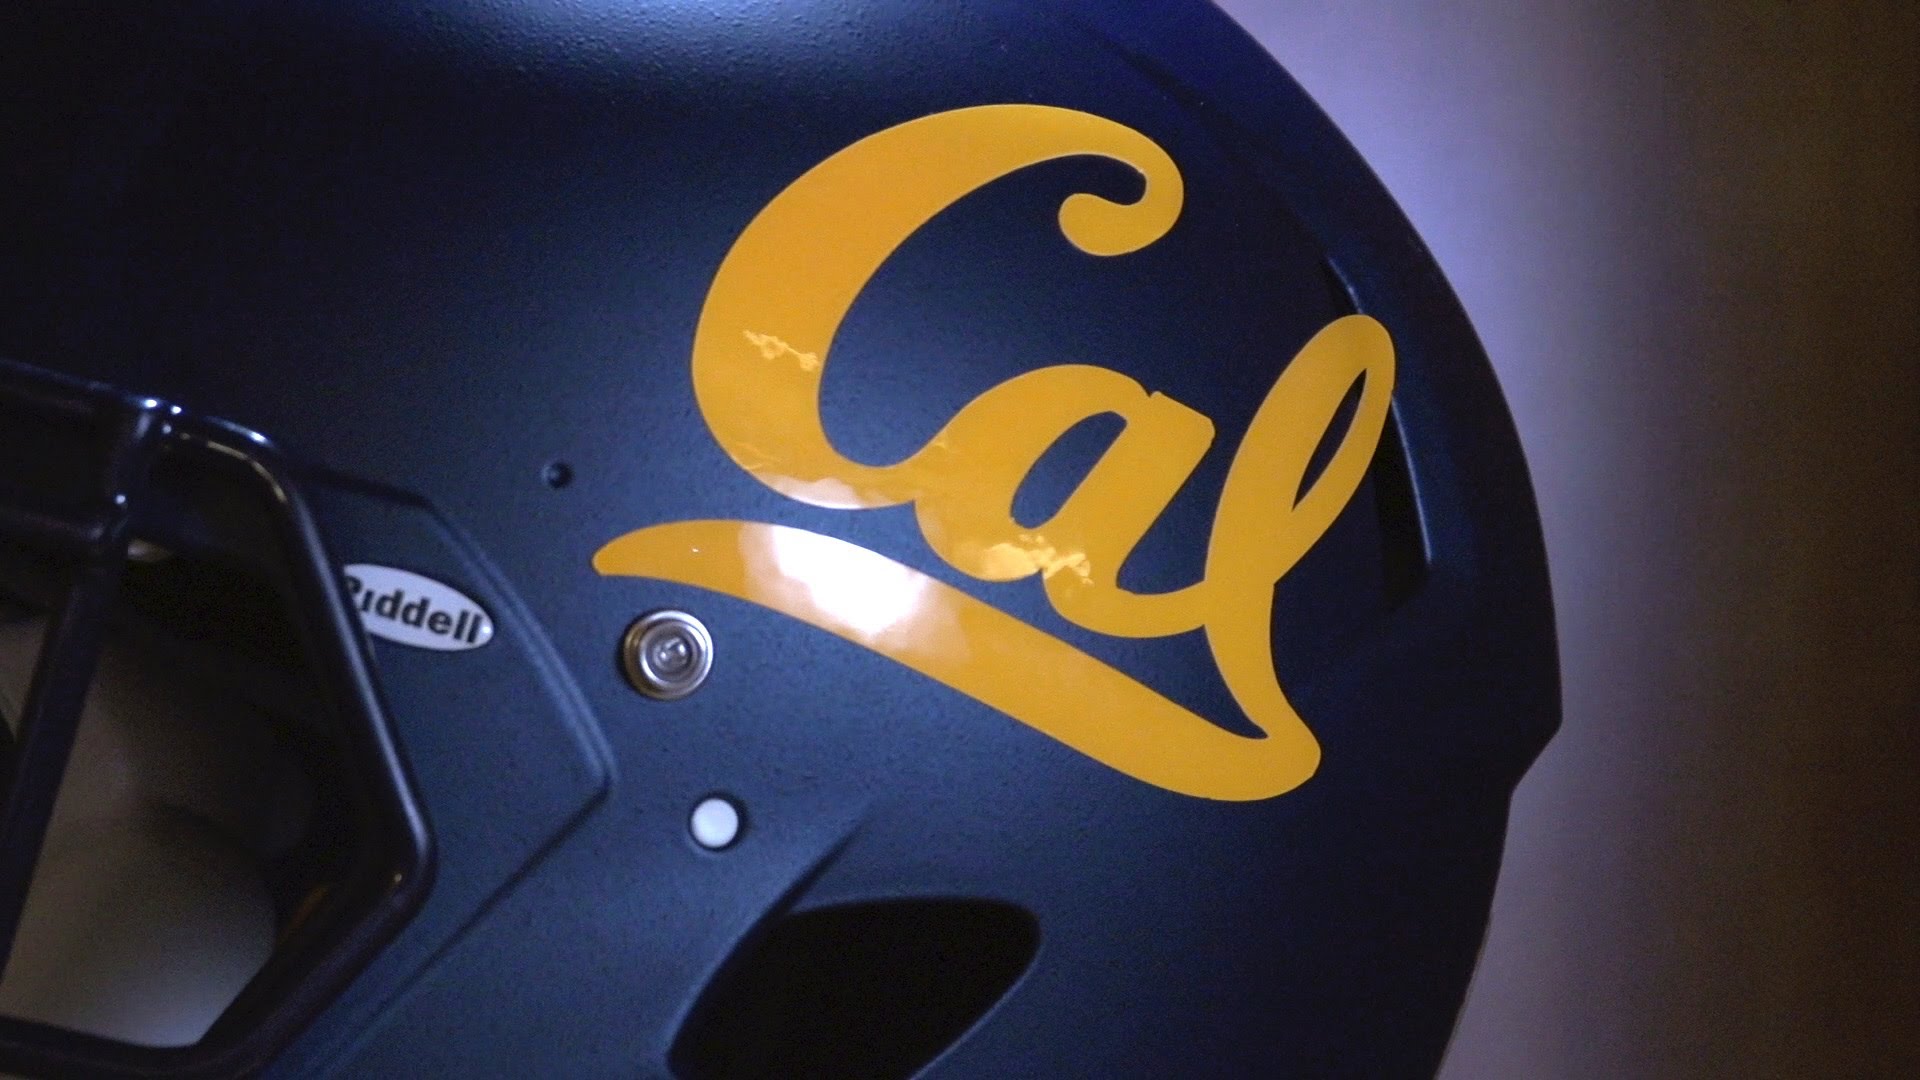 Cal vs. USC Viewing Party – Saturday September 23rd